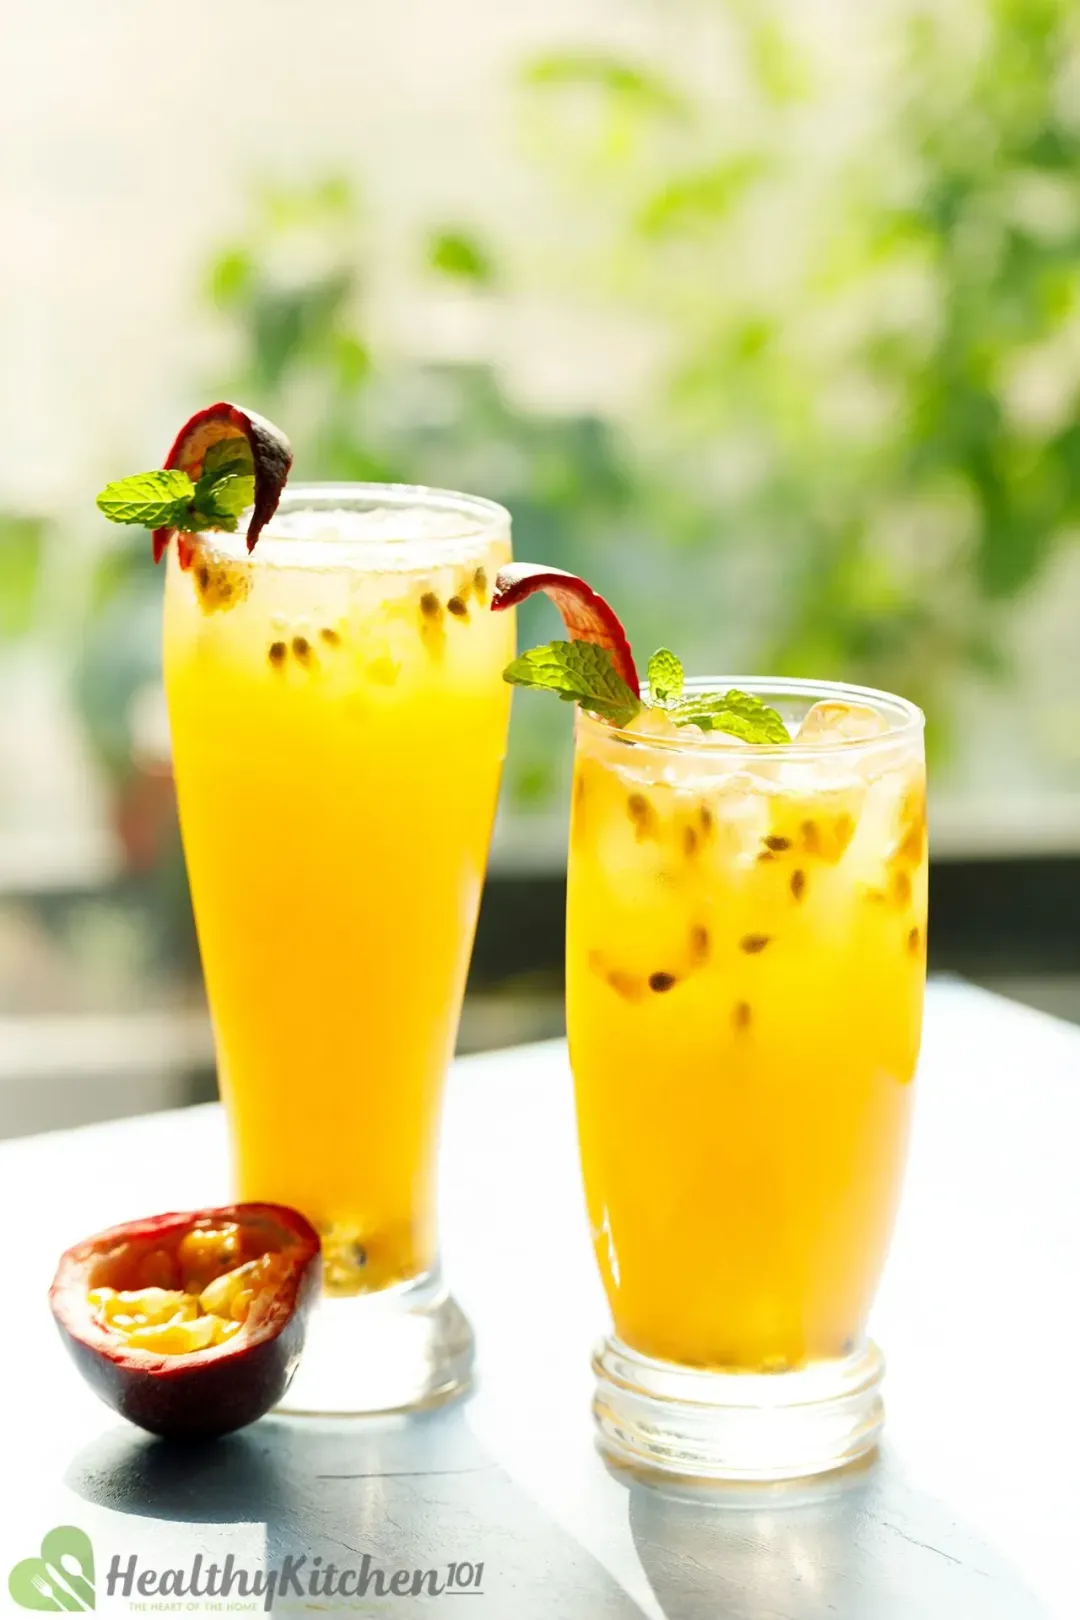 Two glasses of passion fruit juice, with ice and passion seeds inside